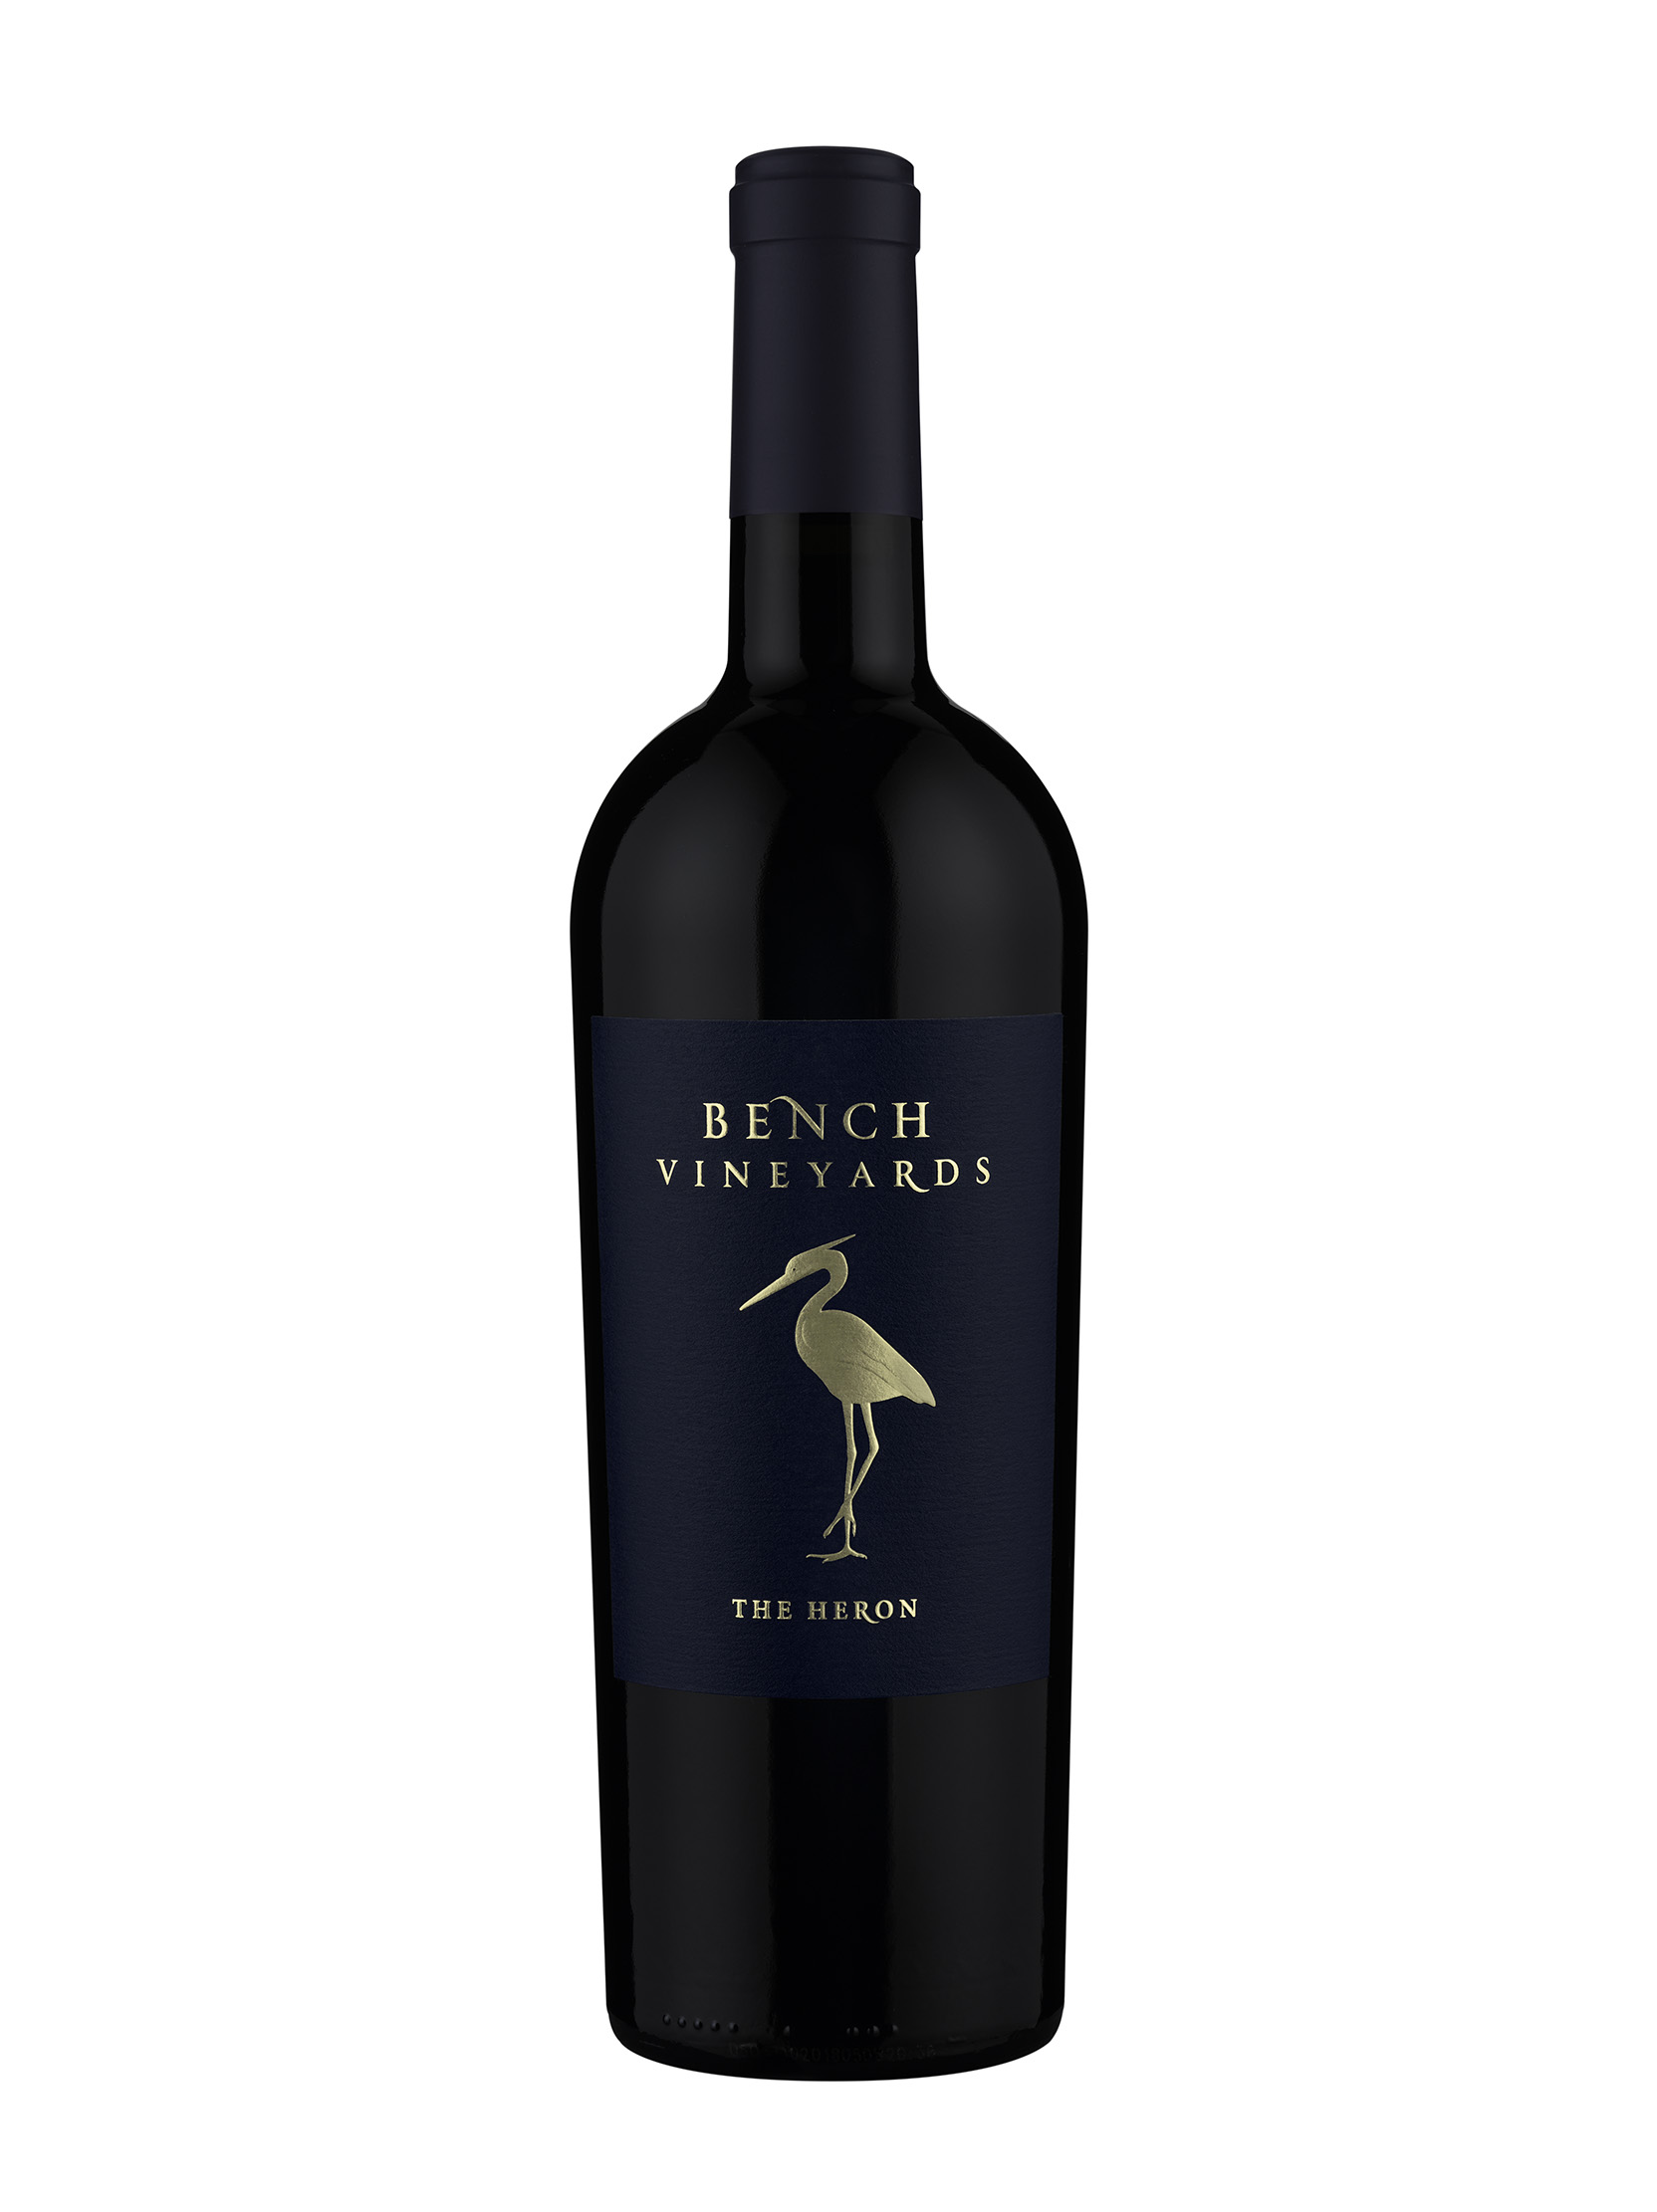 Product Image for 2017 Bench Vineyards "The Heron" Cabernet Sauvignon, SLD